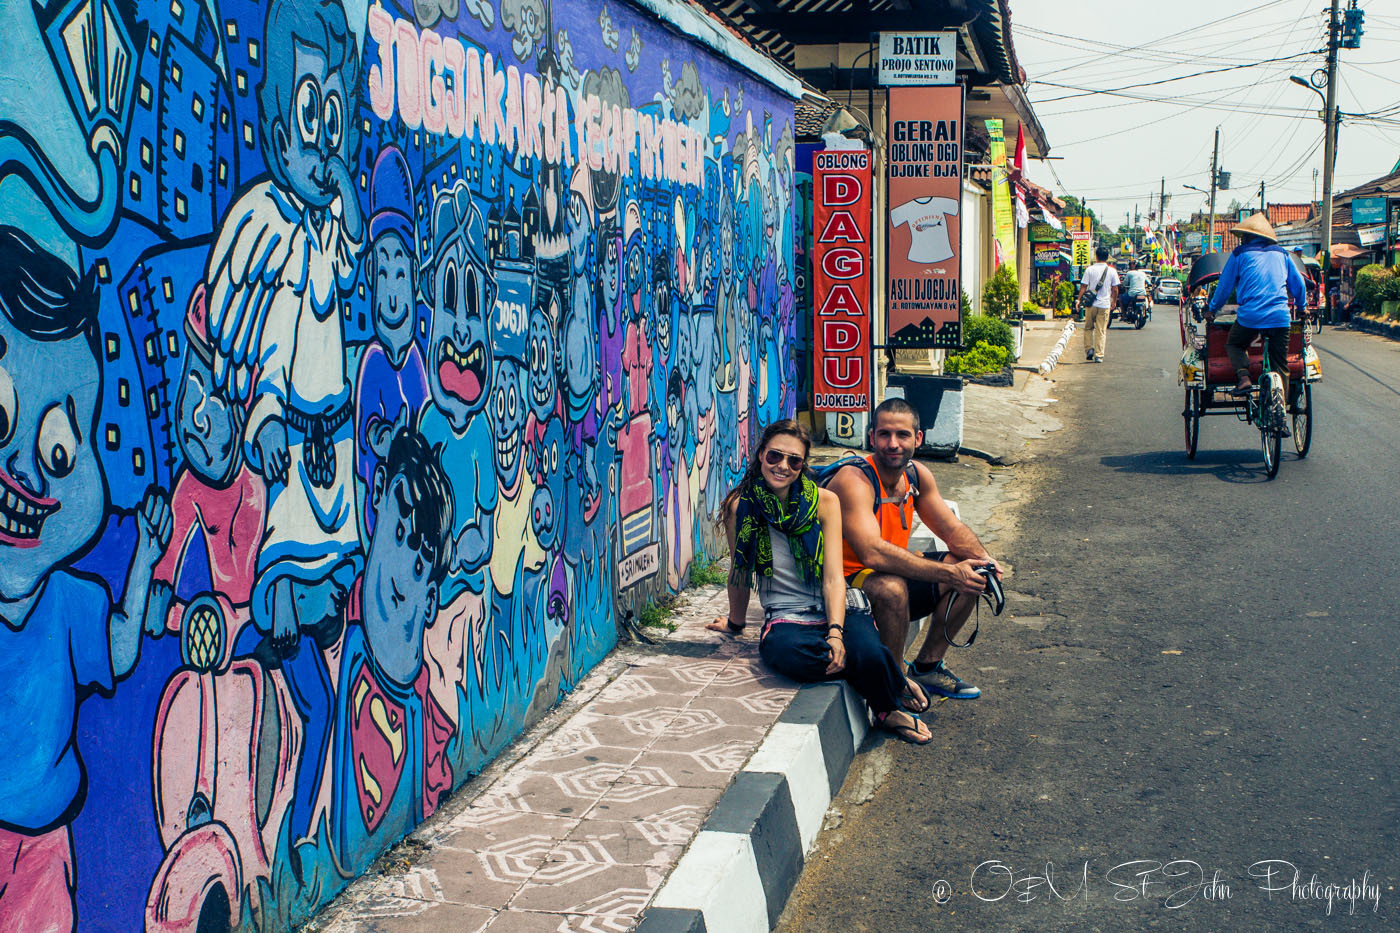 Yogyakarta tour should include a stop at street art like this